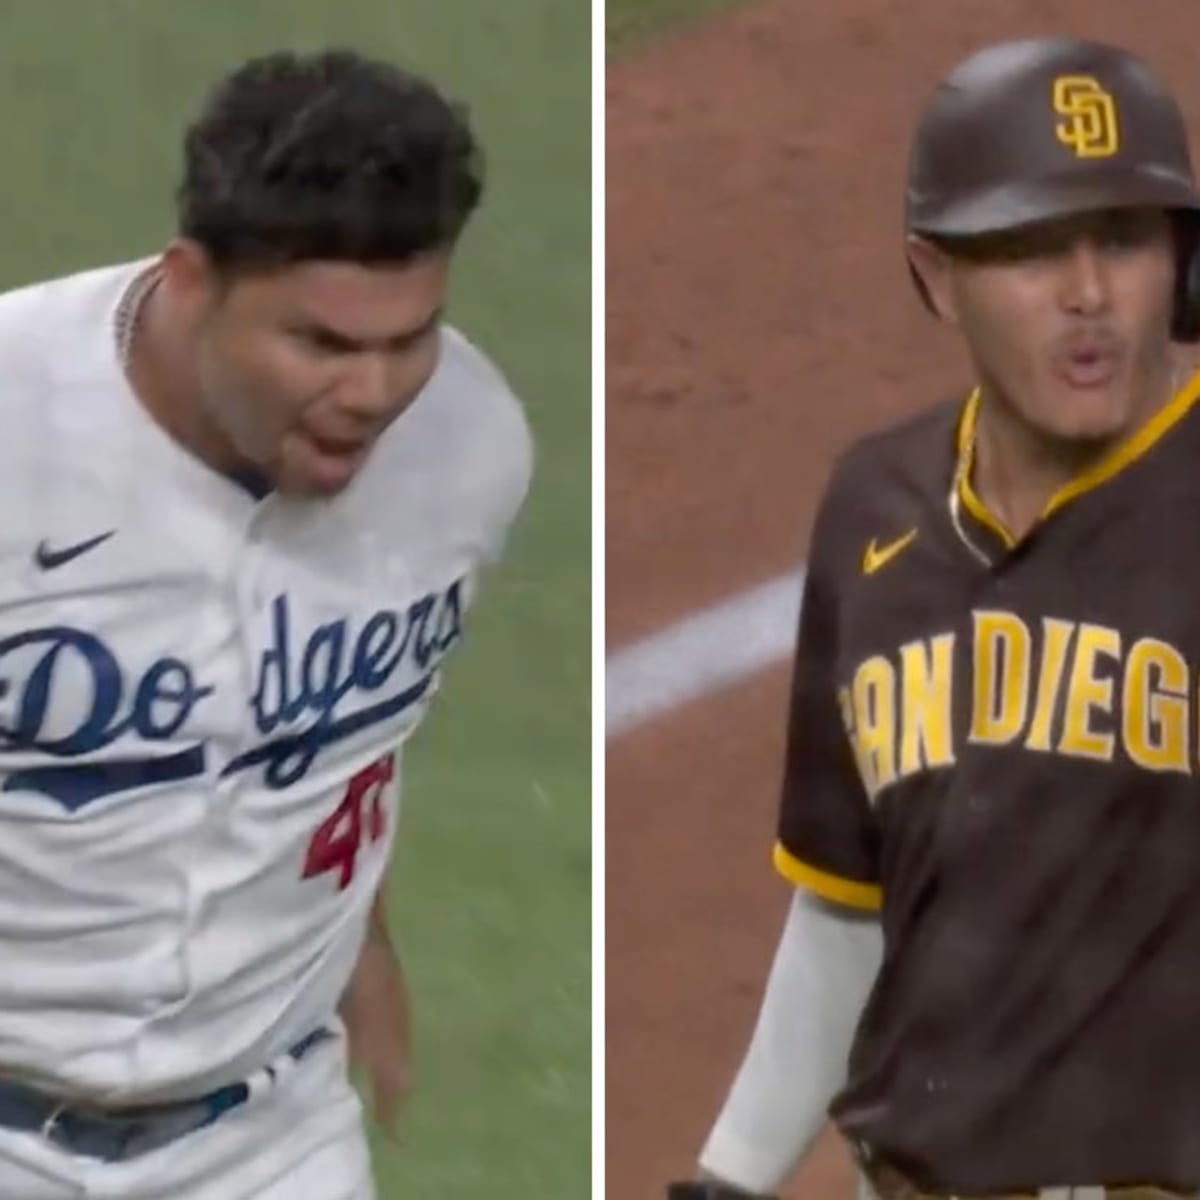 Dodgers' bunt blunders set up Manny Machado blast and another loss